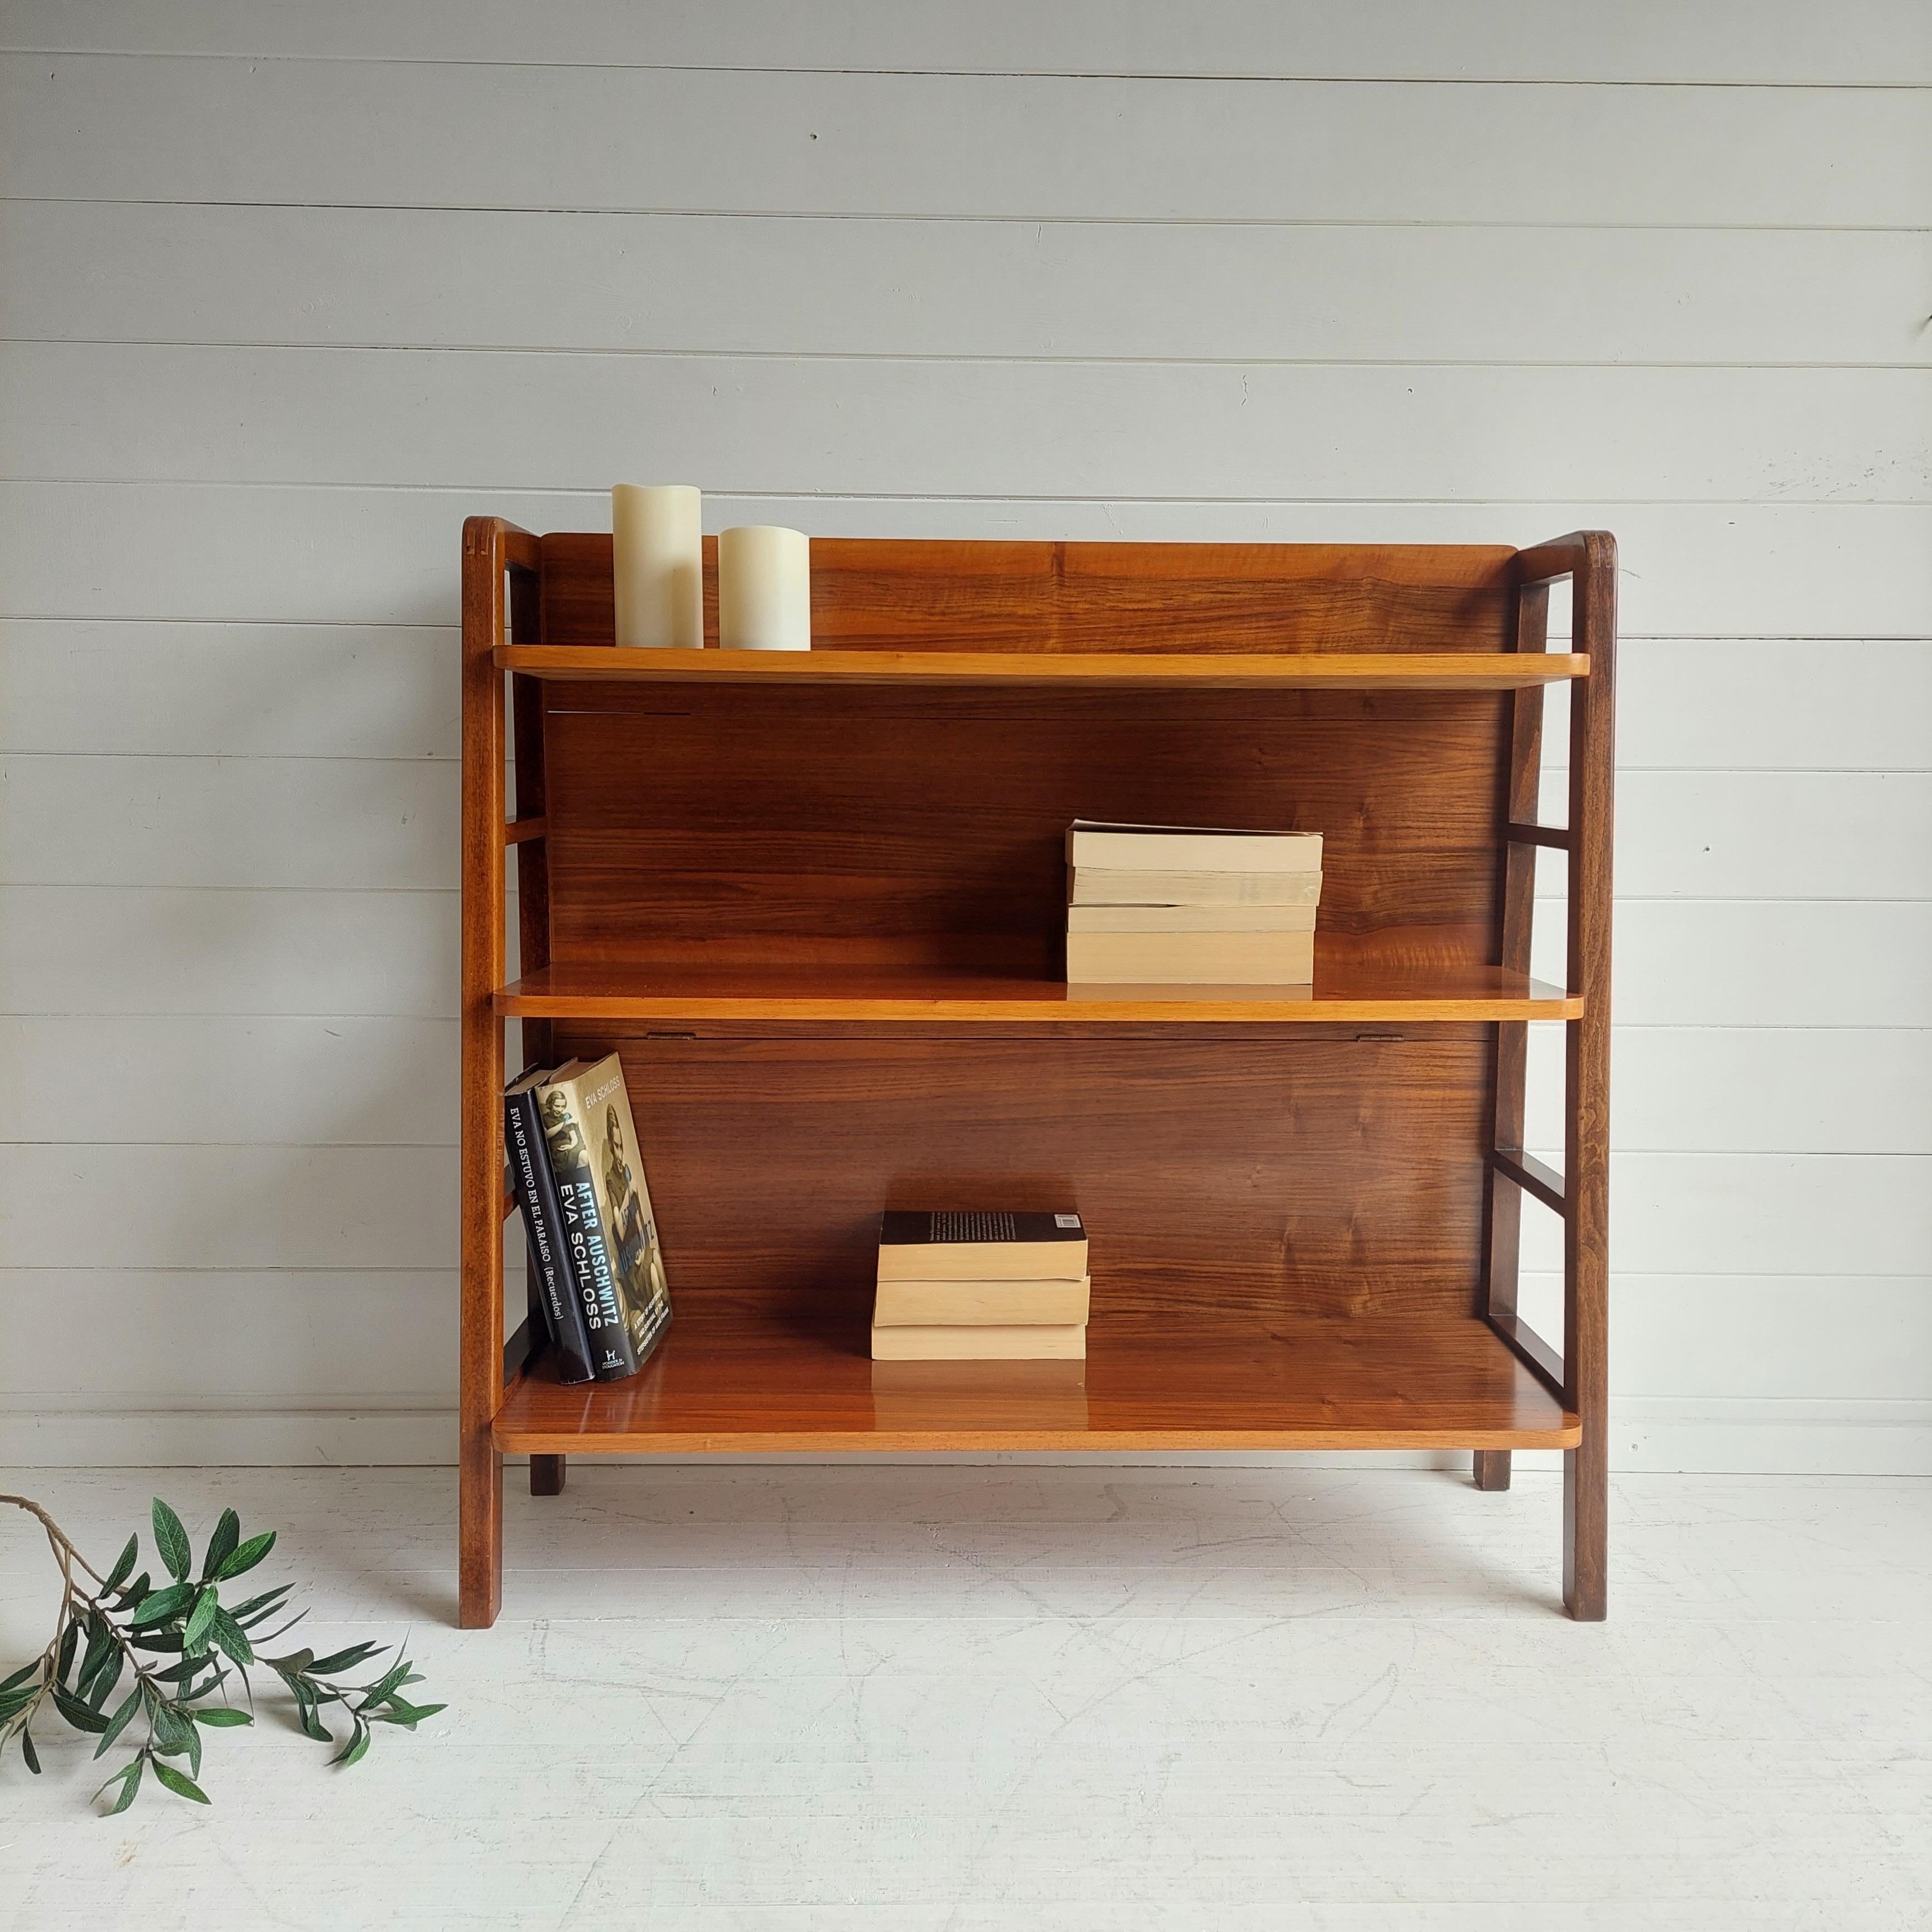 Minimalist wooden bookcase, gorgeous colour.
Dating from the Late Art Deco period eraly Mid century period.
Most ptobably 1950s.
This vintage Mid-Century Modern bookcase is crafted out of walnut wood and has been professionally restored by our